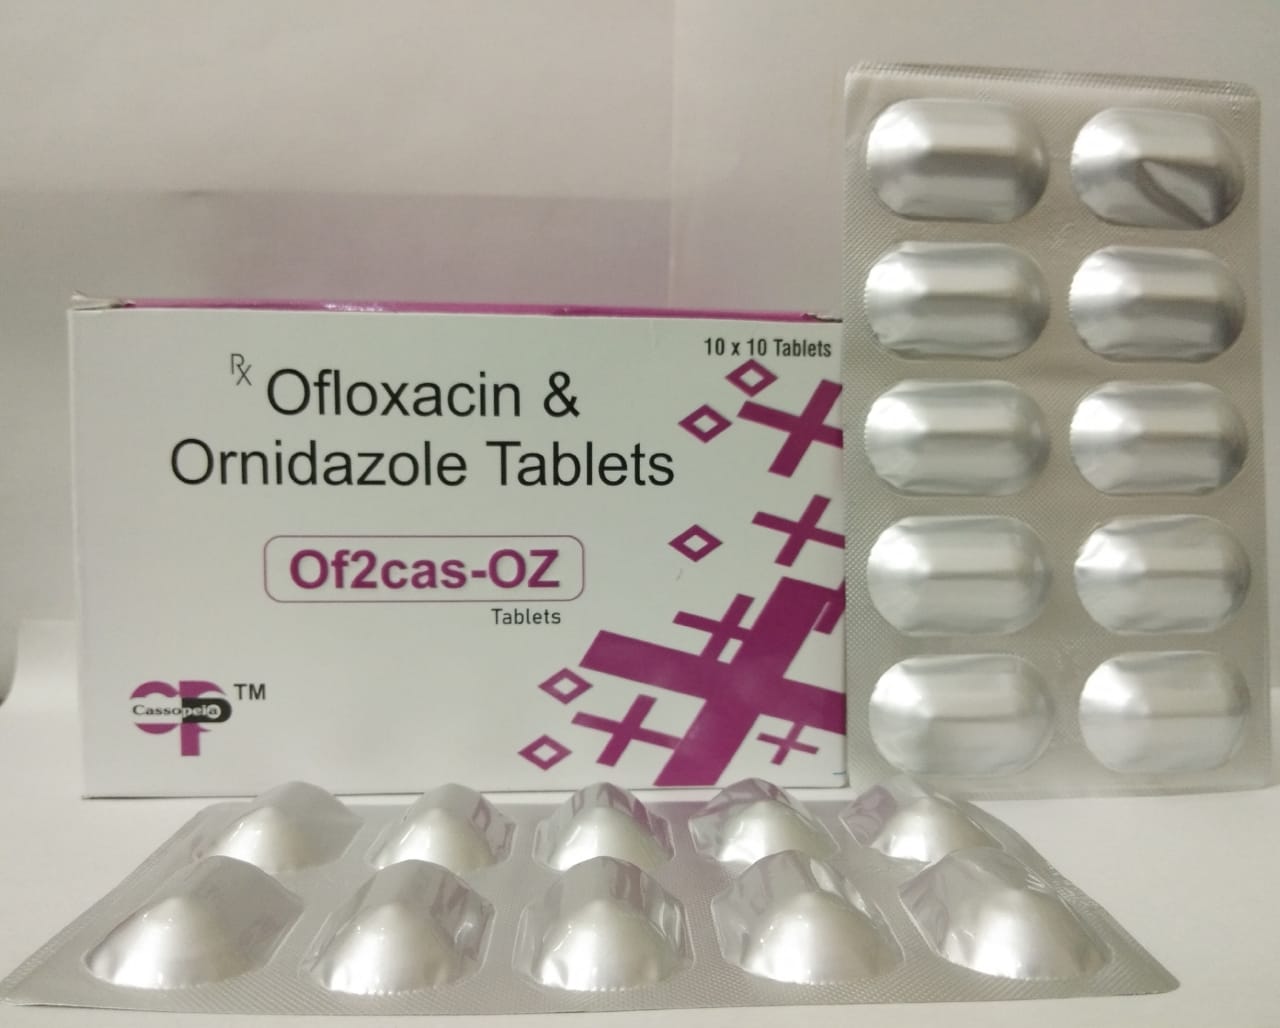 Product Name: Of2cas OZ, Compositions of Of2cas OZ are Ofloxacin & Ornidazole Tablets - Cassopeia Pharmaceutical Pvt Ltd